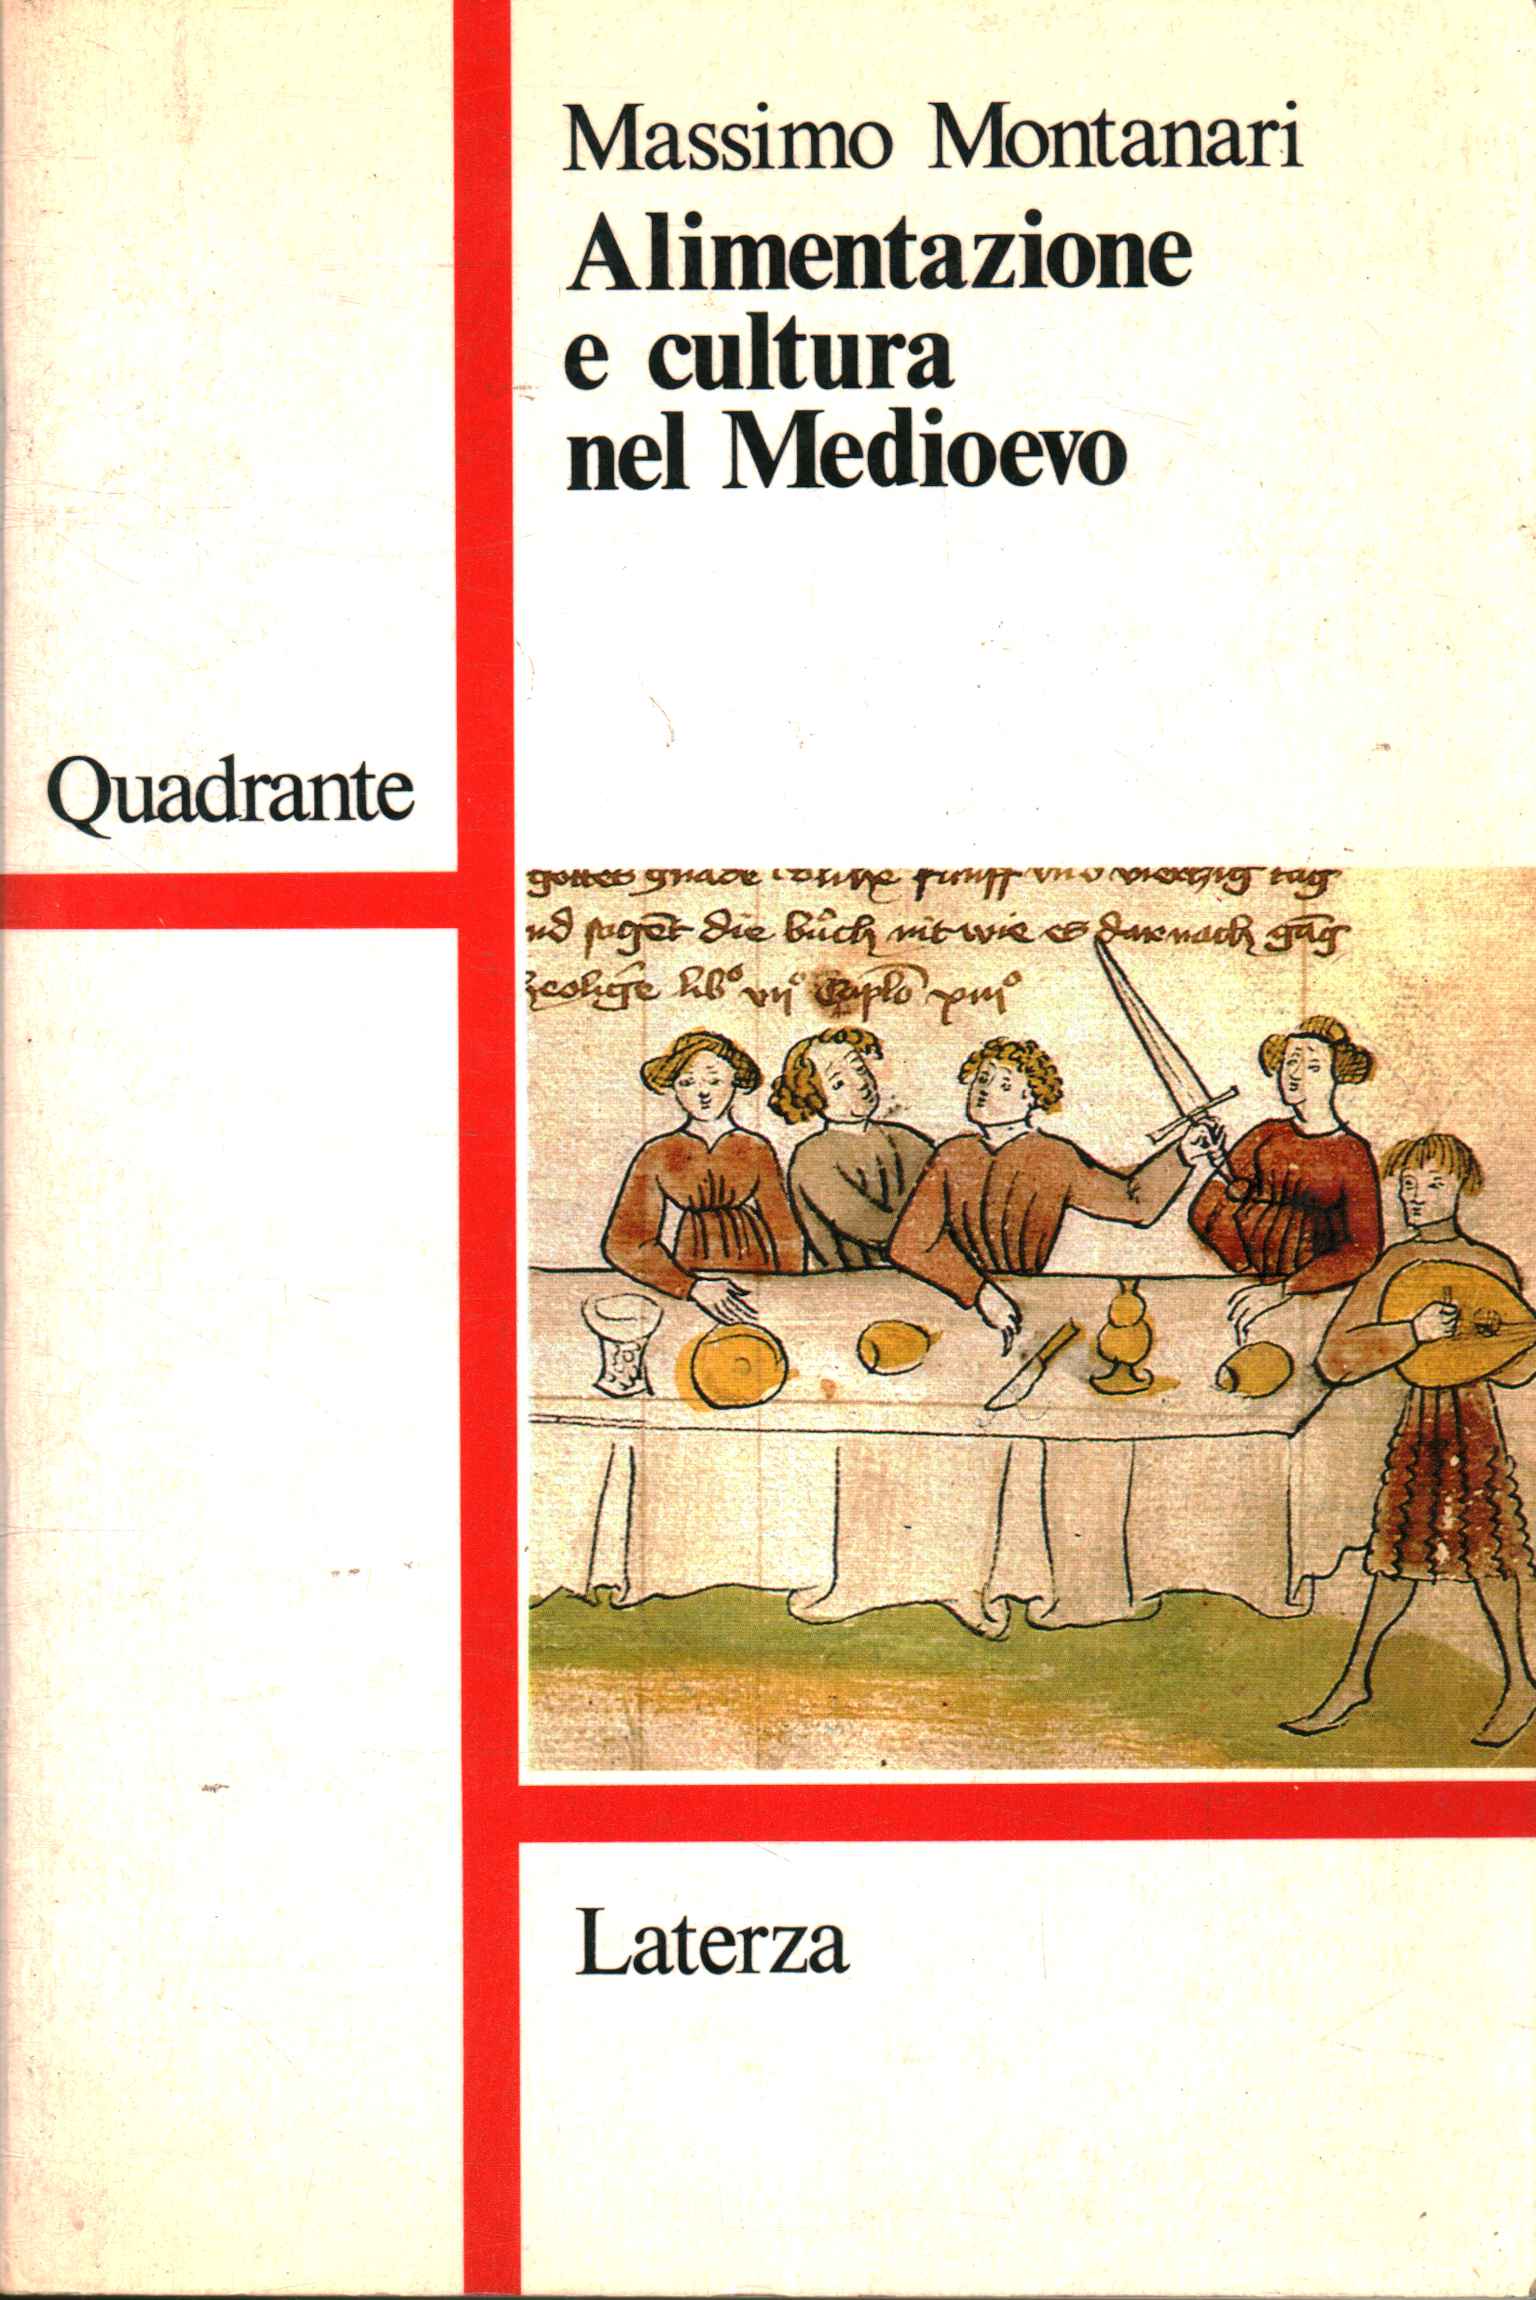 Food and culture in the Middle Ages